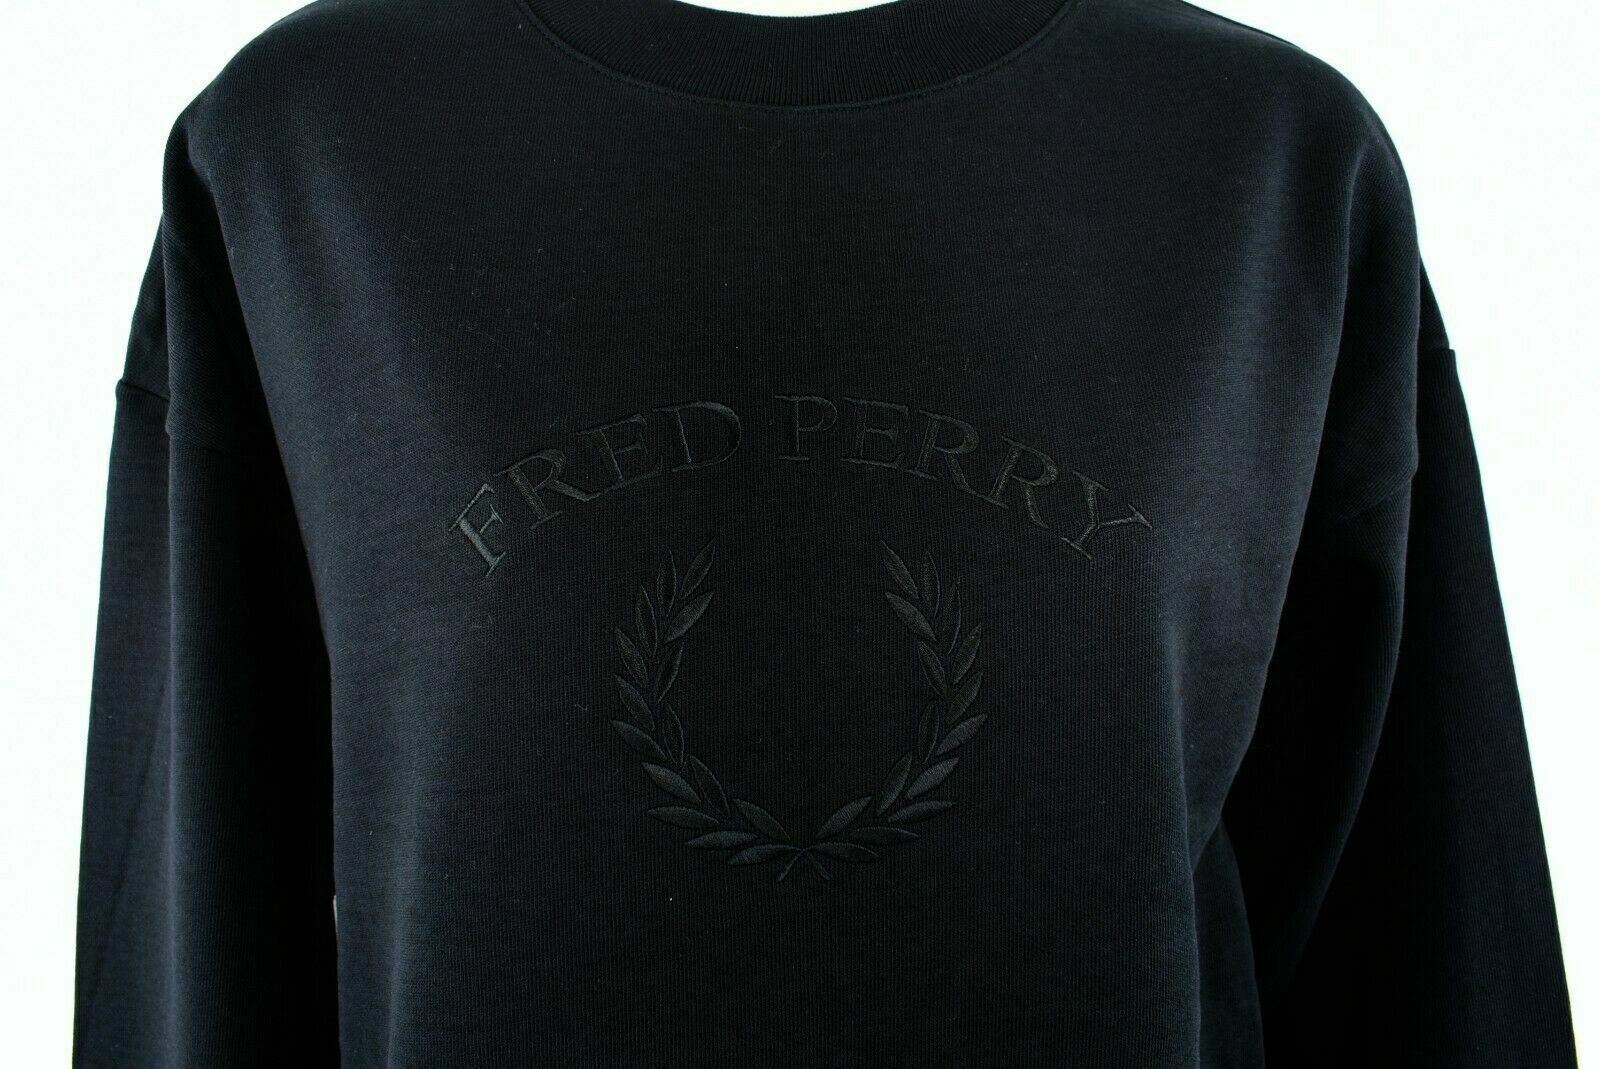 FRED PERRY Women's Black Embroidered Logo Cotton Jersey Sweatshirt, UK 14